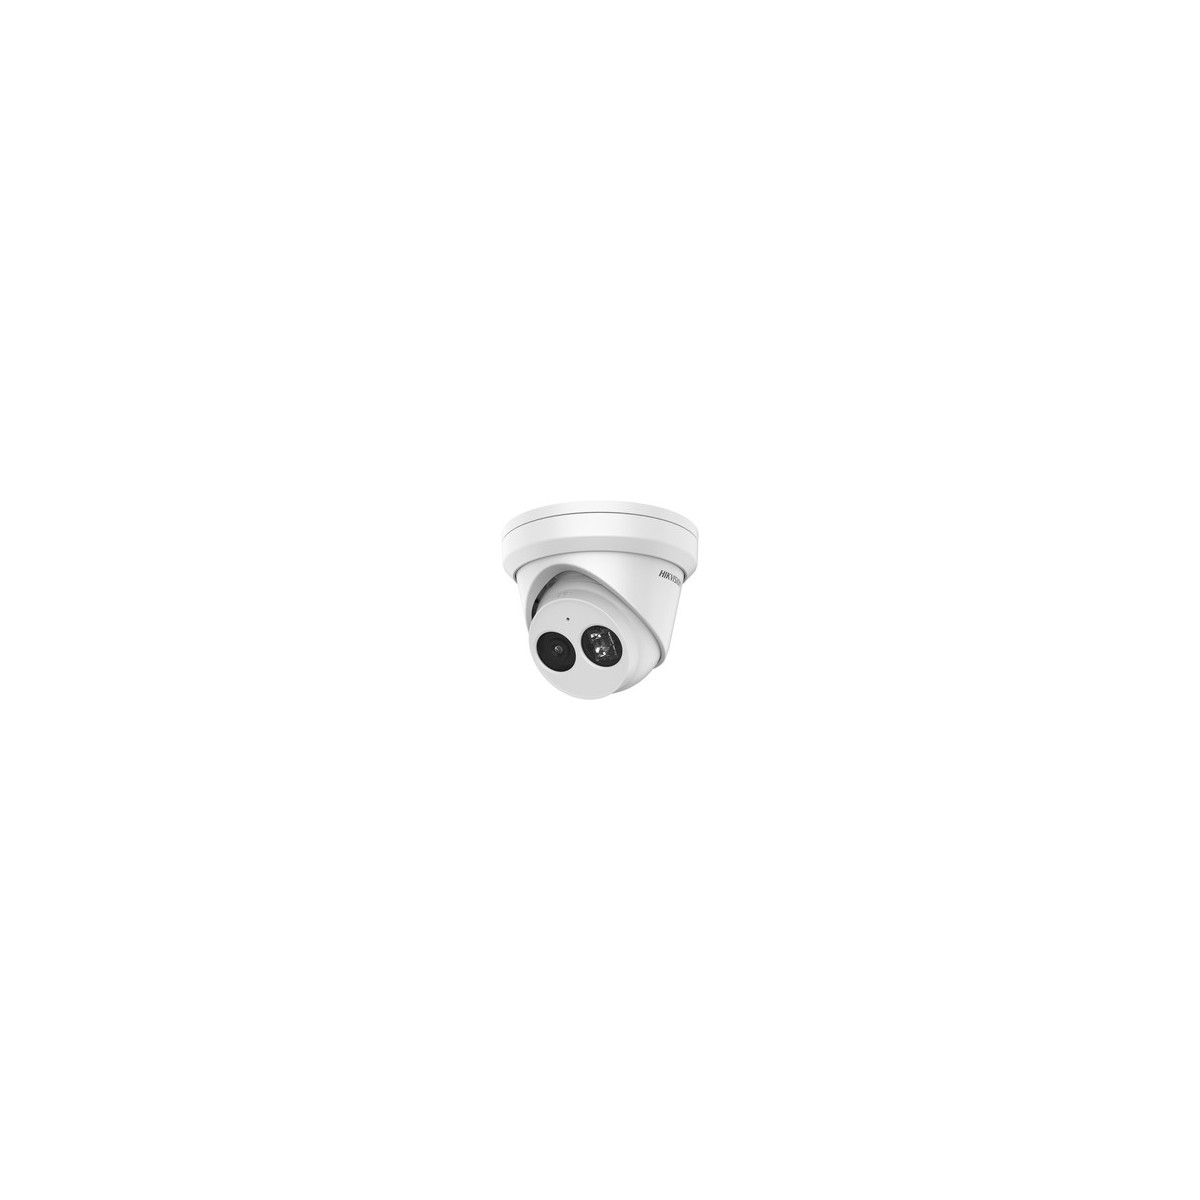 Hikvision Digital Technology DS-2CD3343G2-IU - IP security camera - Outdoor - Wired - Ceiling-wall - White - Turret